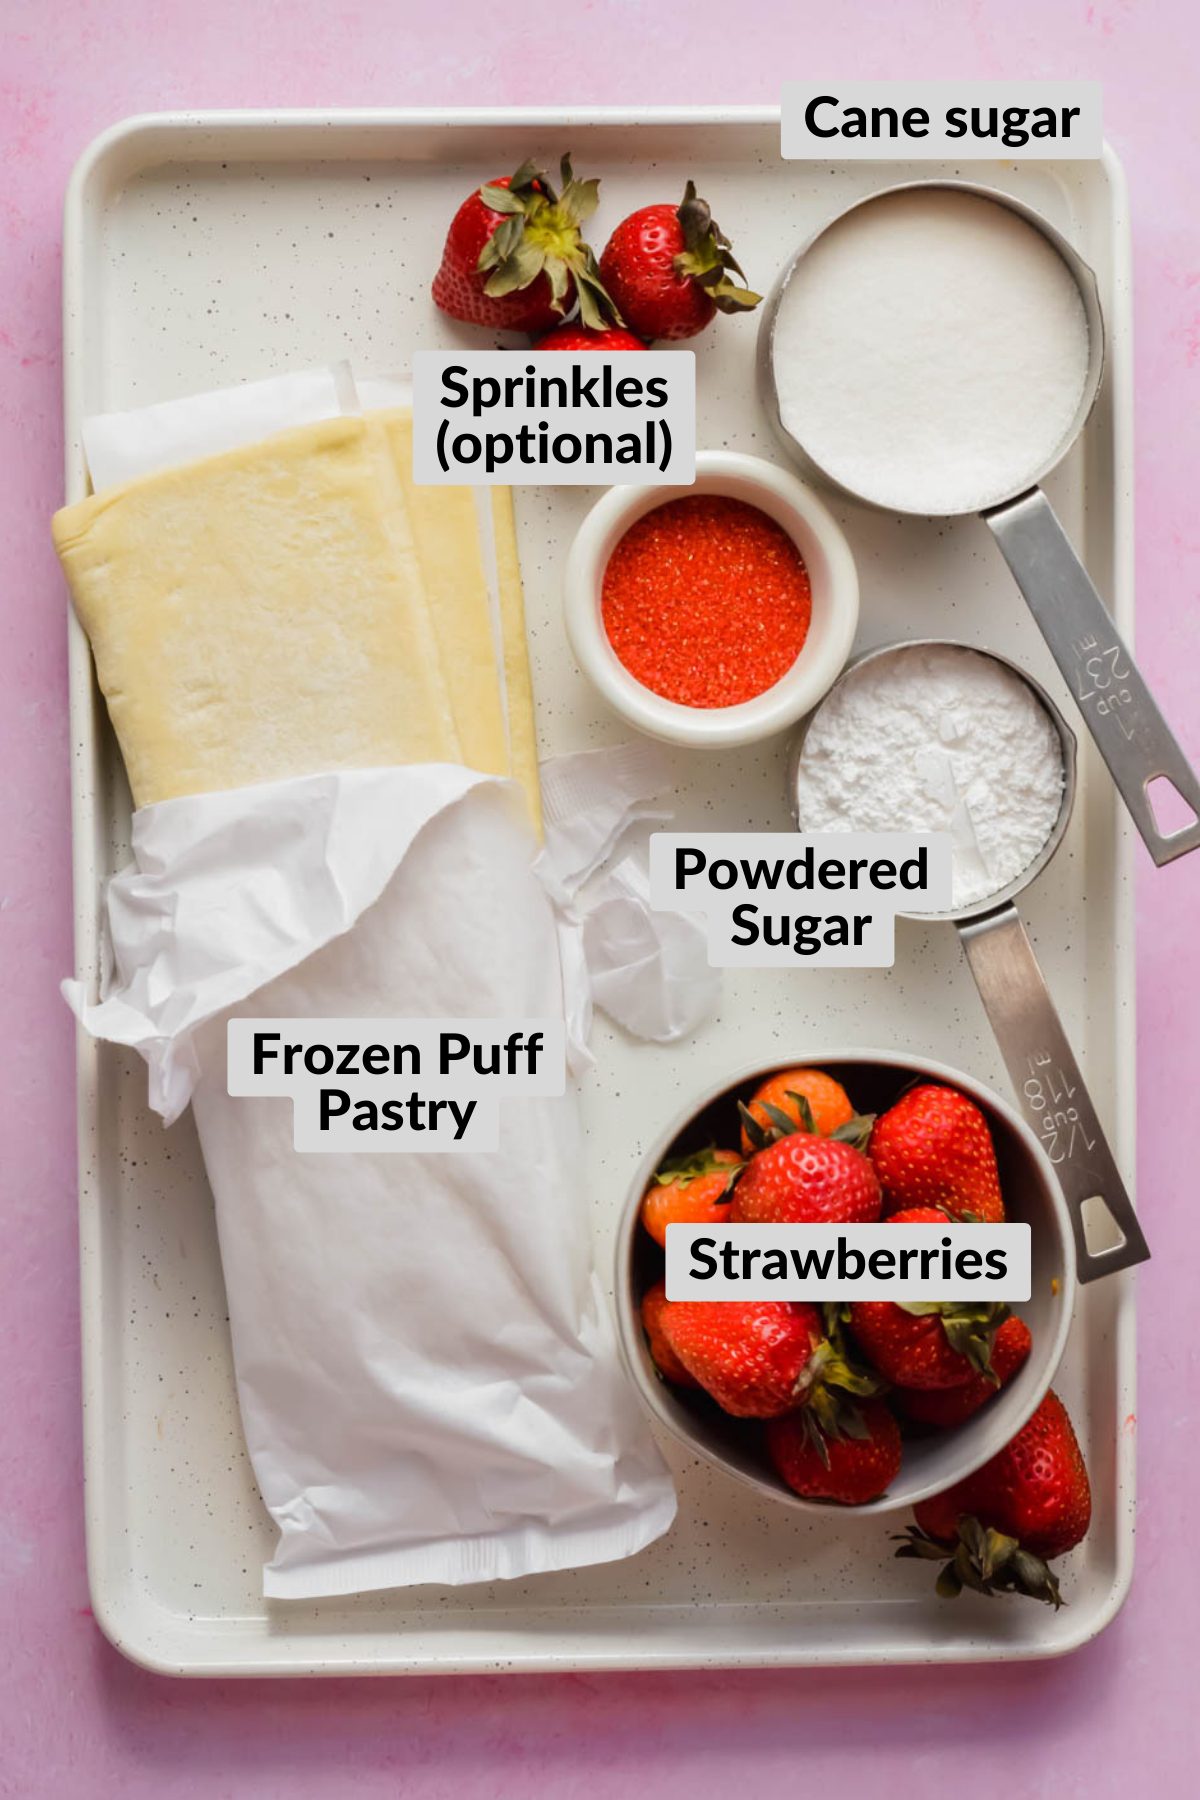 Ingredients for frosted strawberry pop tarts on white baking tray on pink background.